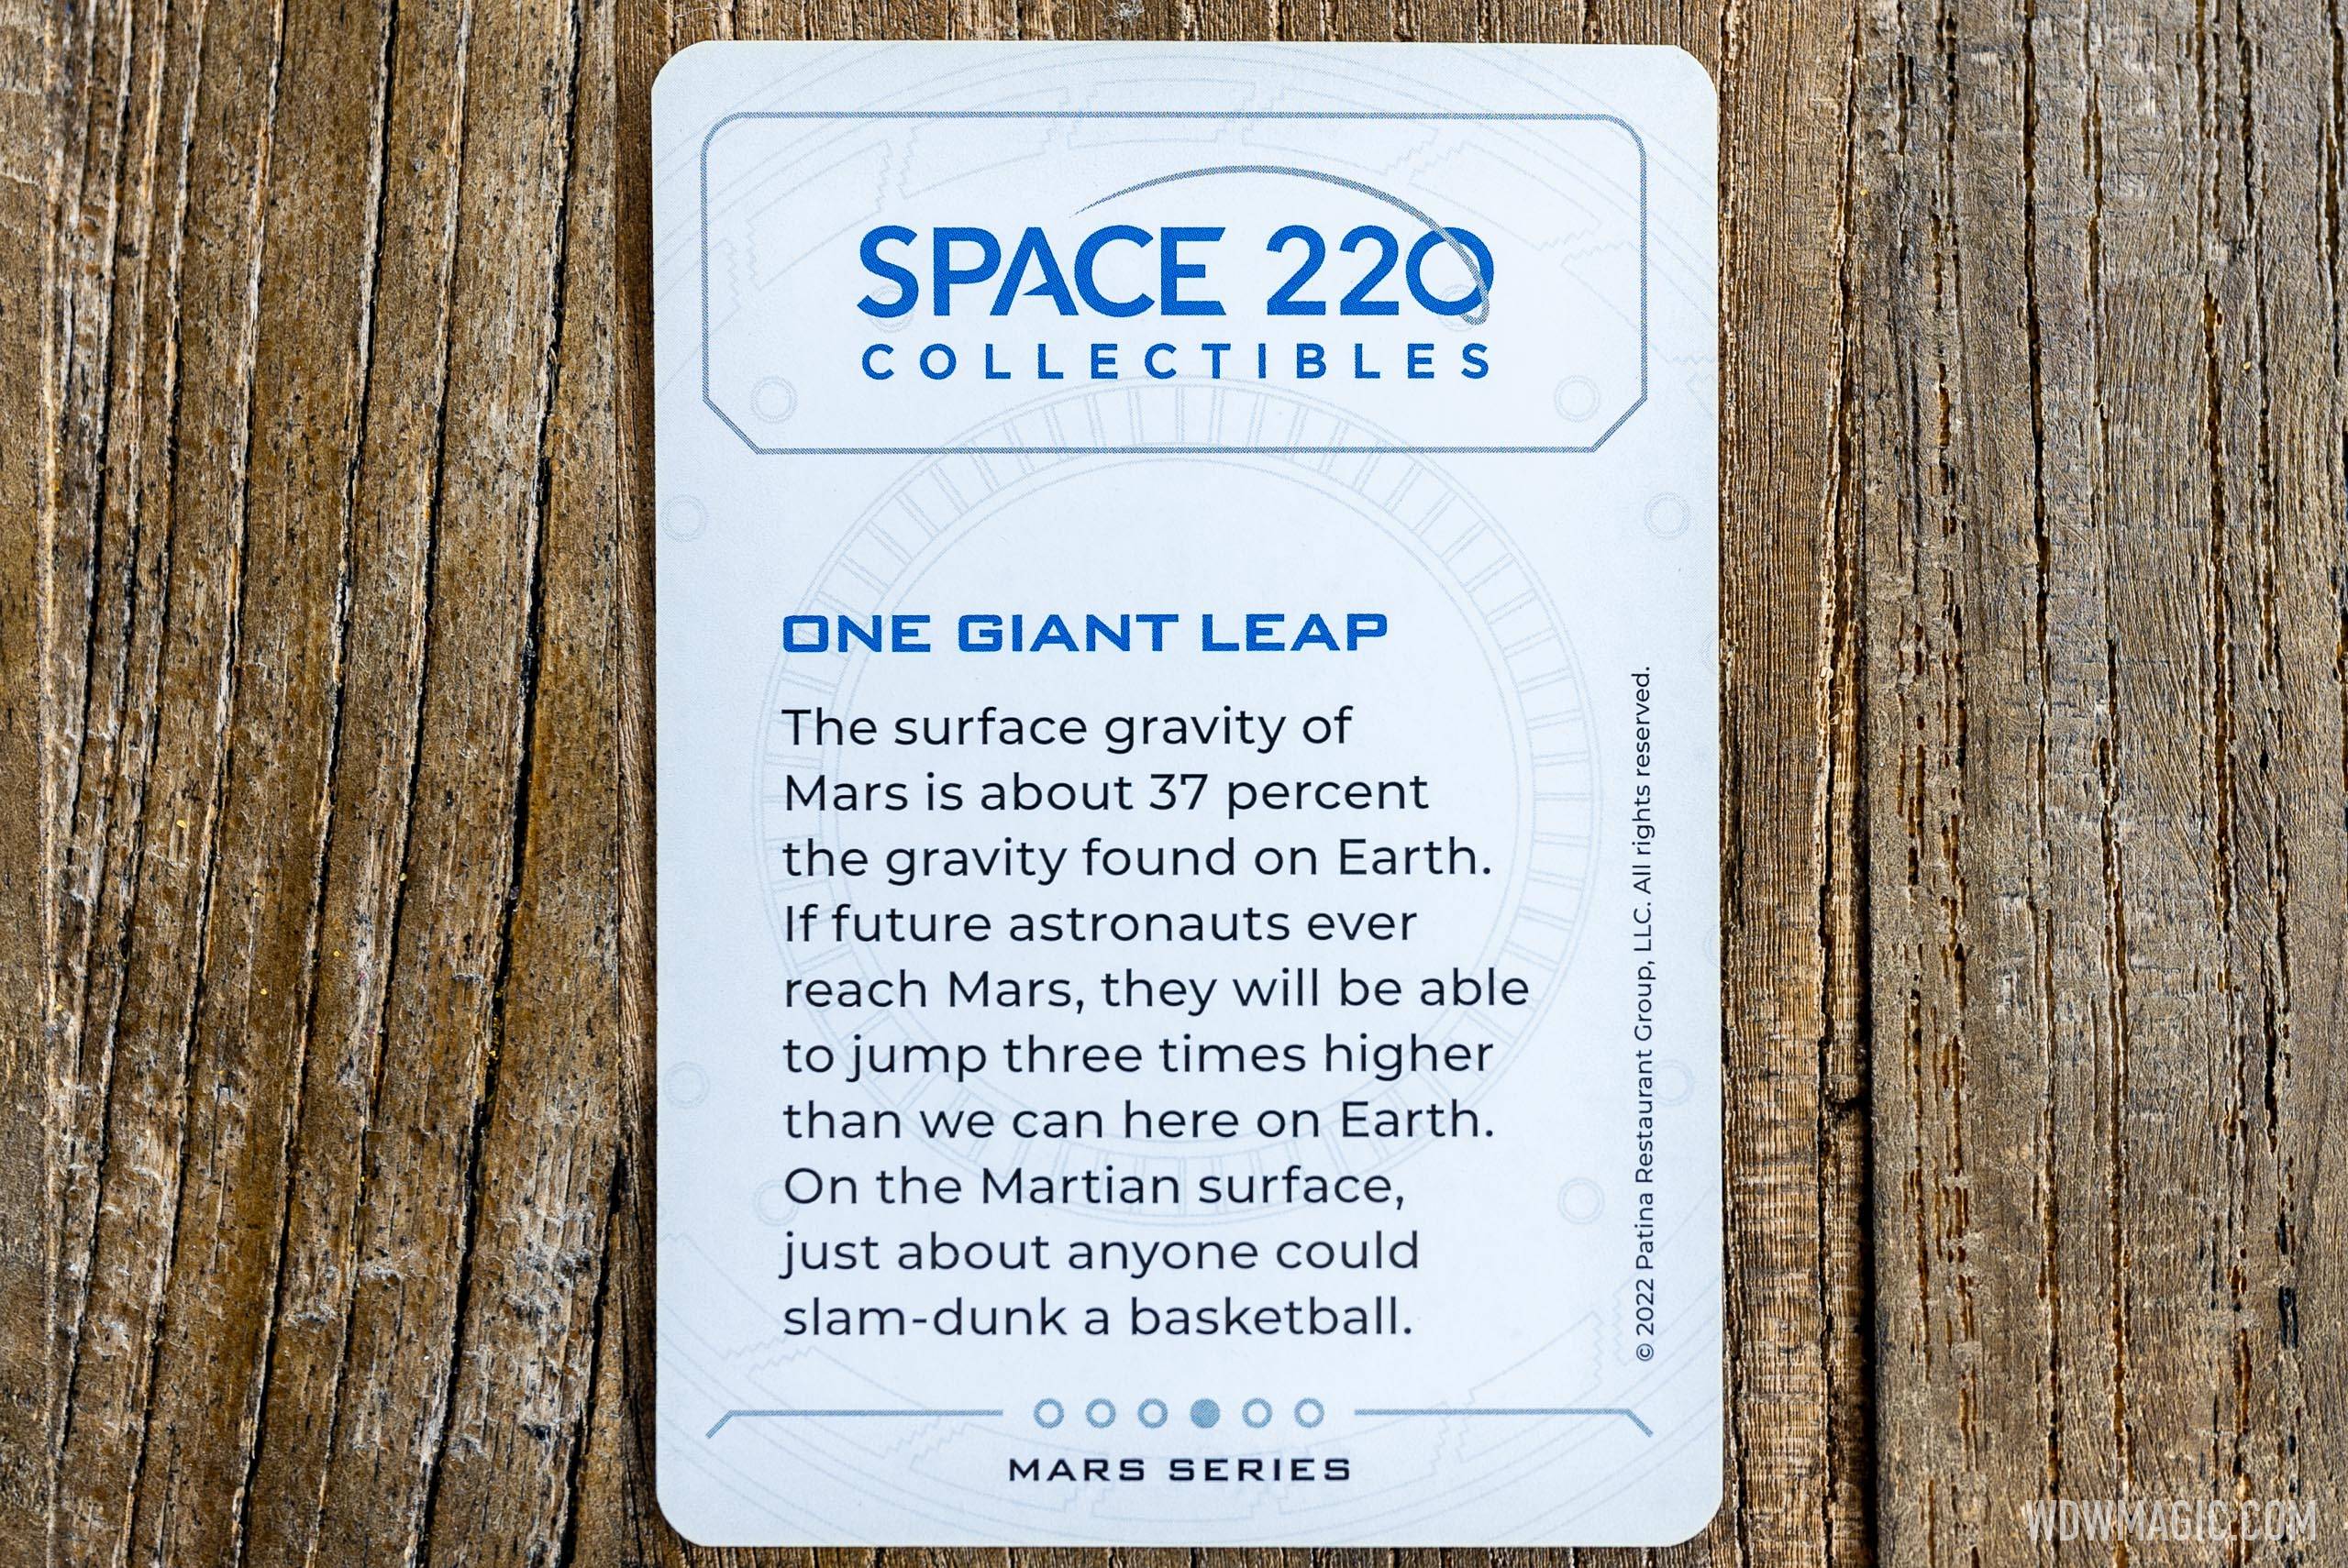 The back of each trading card contains space fun facts